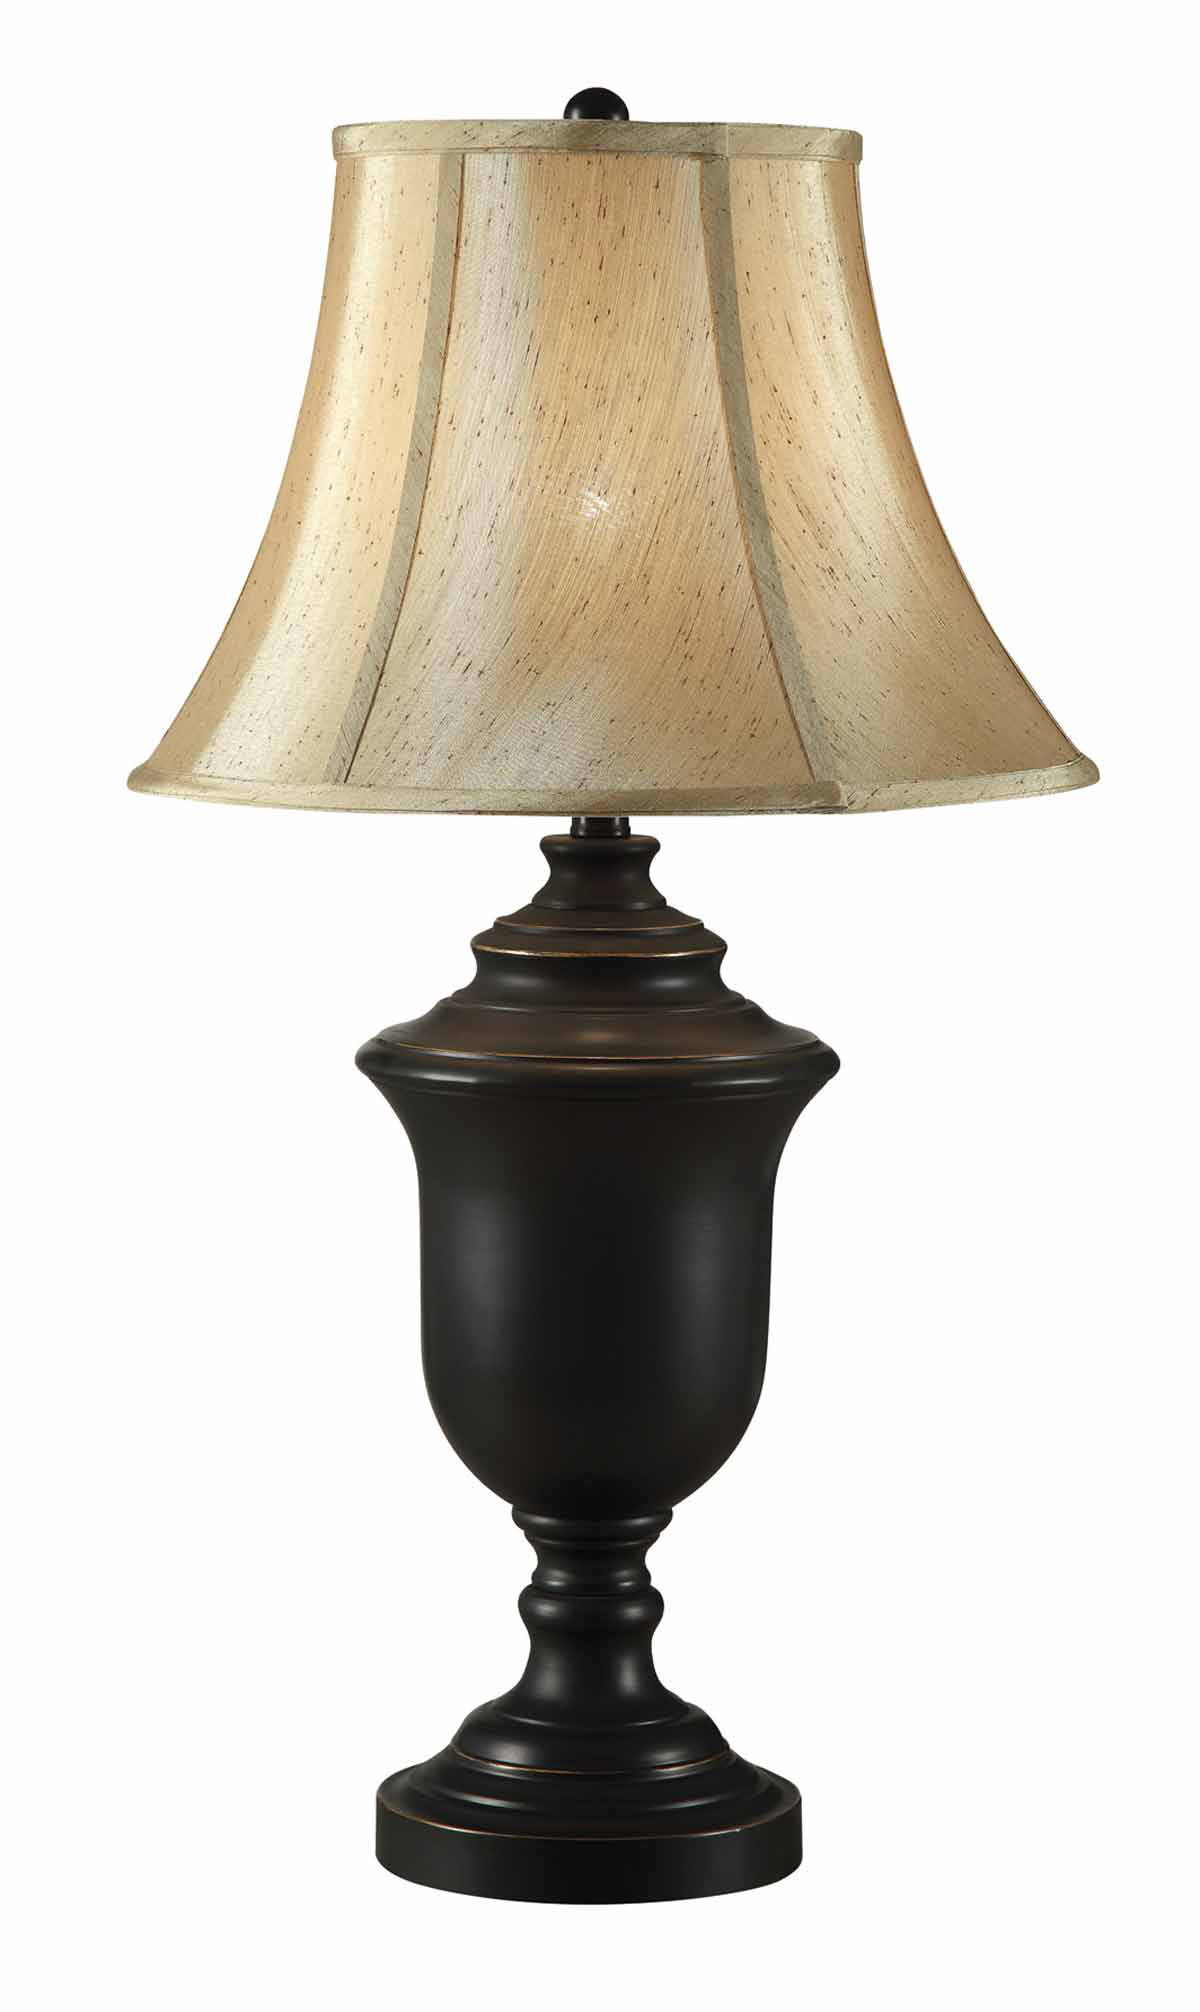 Coaster 901536 Table Lamp - Coffee/Gold Highlights